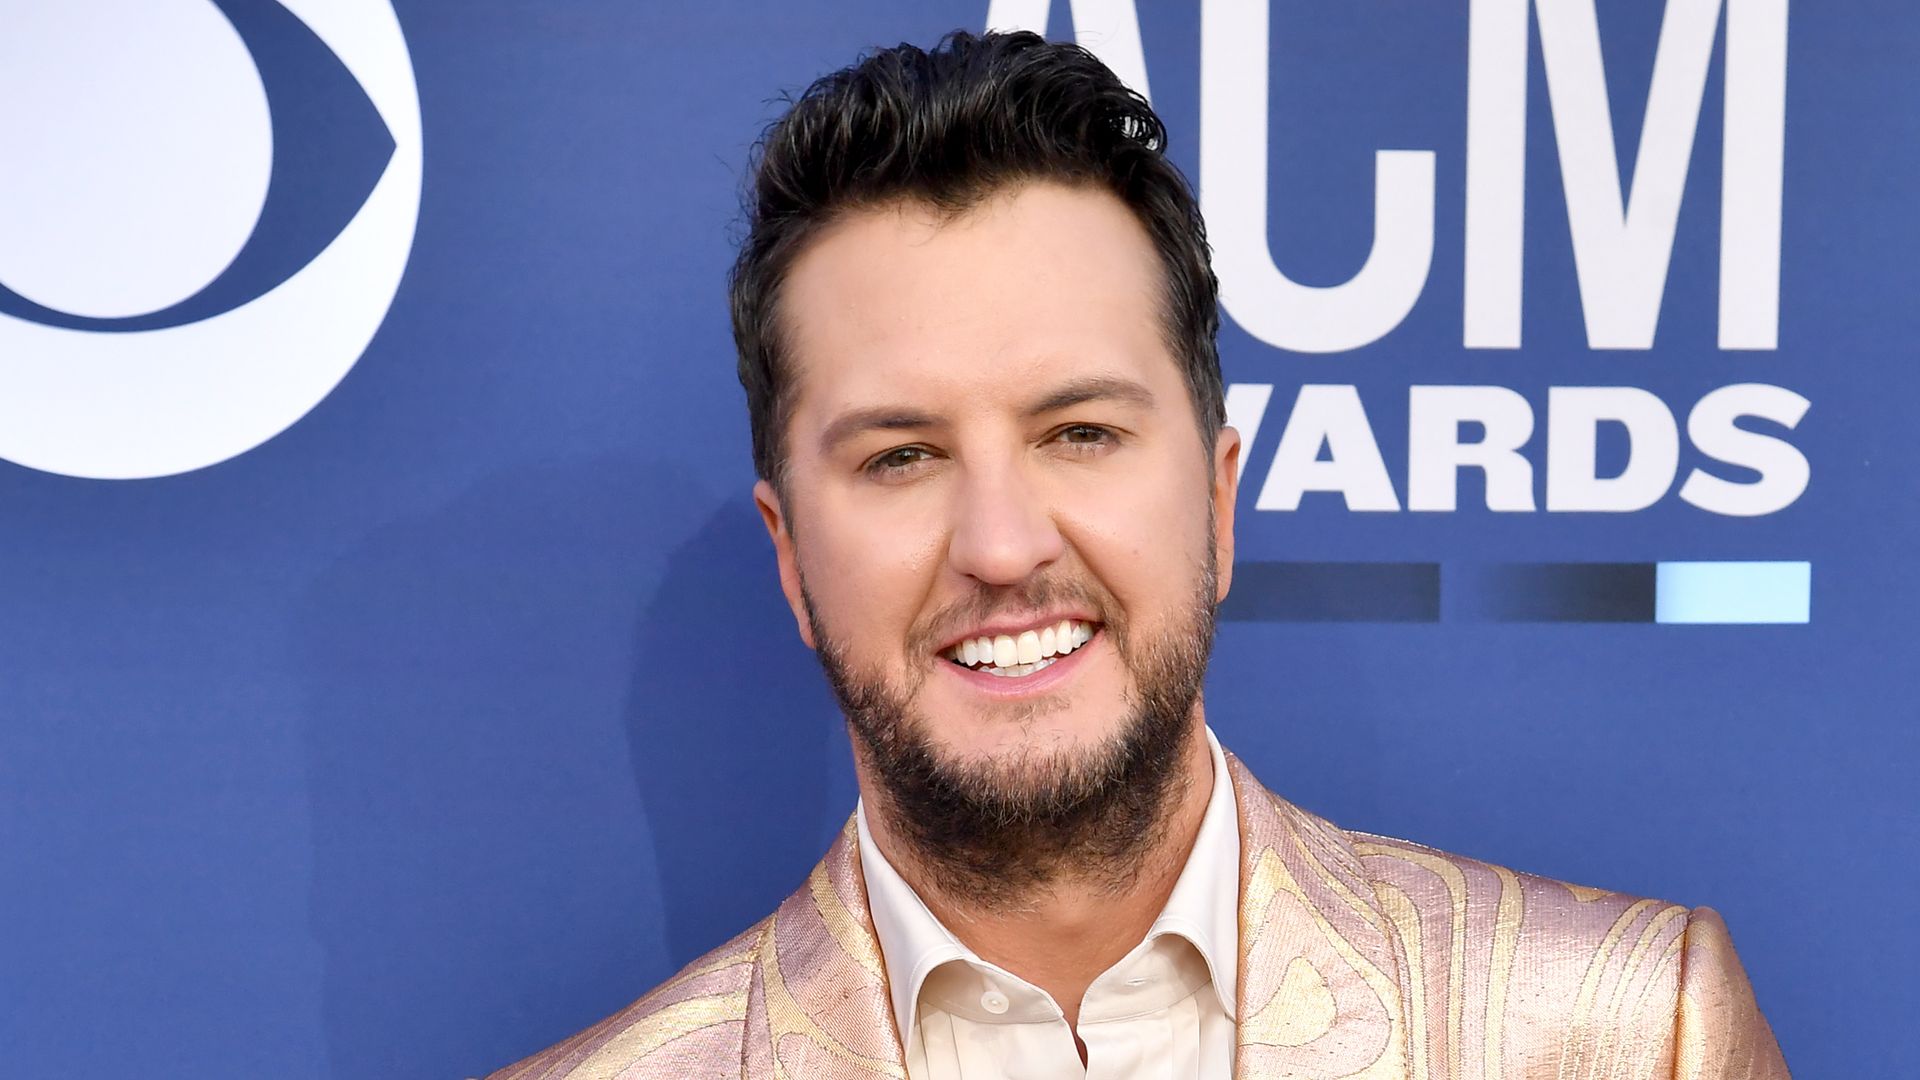 Luke Bryan attends the 54th Academy Of Country Music Awards at MGM Grand Hotel & Casino on April 07, 2019 in Las Vegas, Nevada.